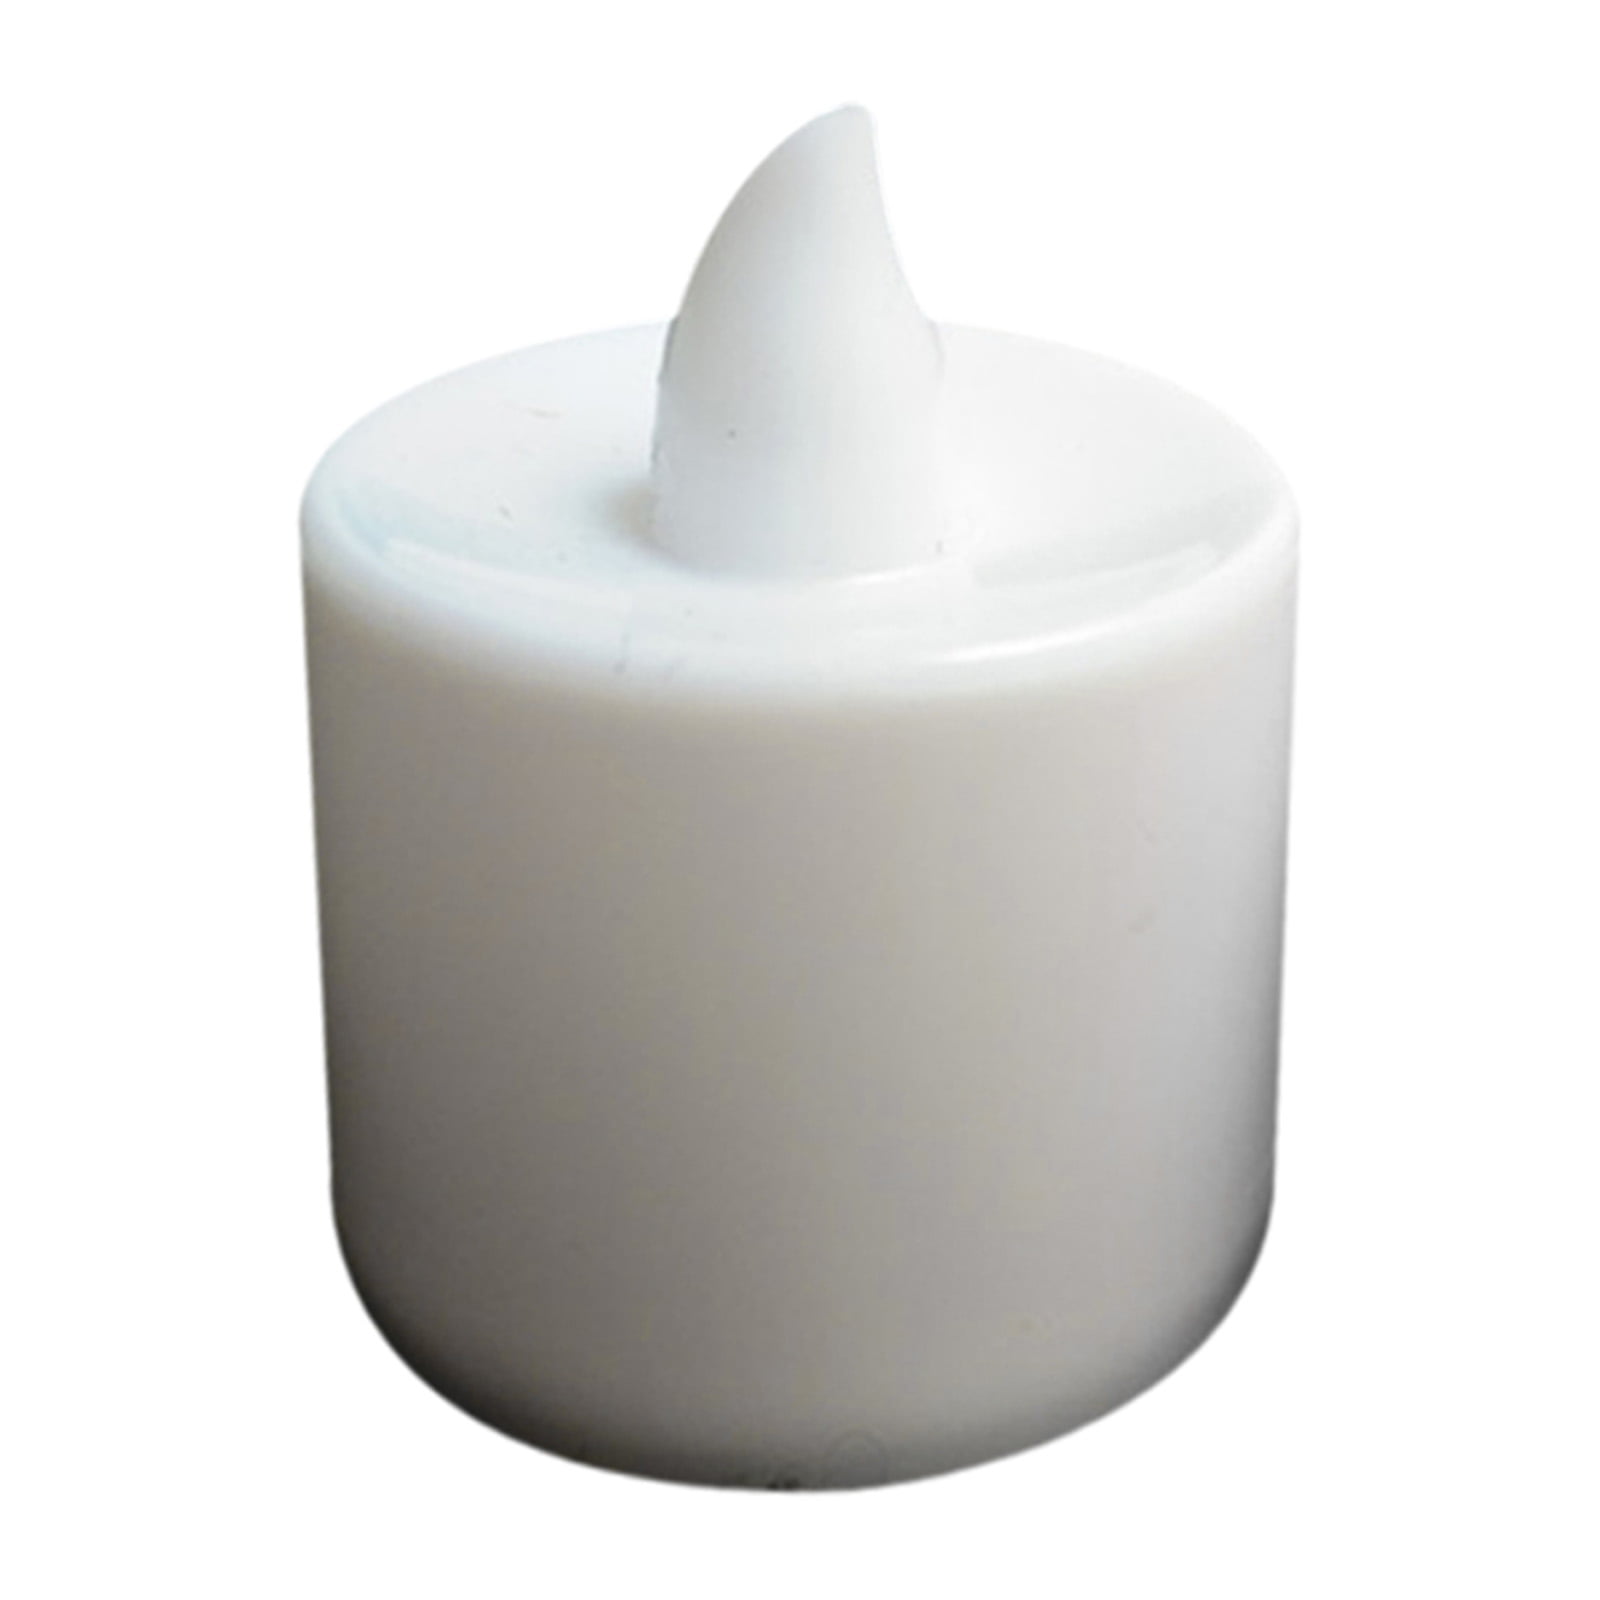 Pack of 3 Unscented White Home & Wedding Decor & Church Pillar Candles 15x 4.5cm 